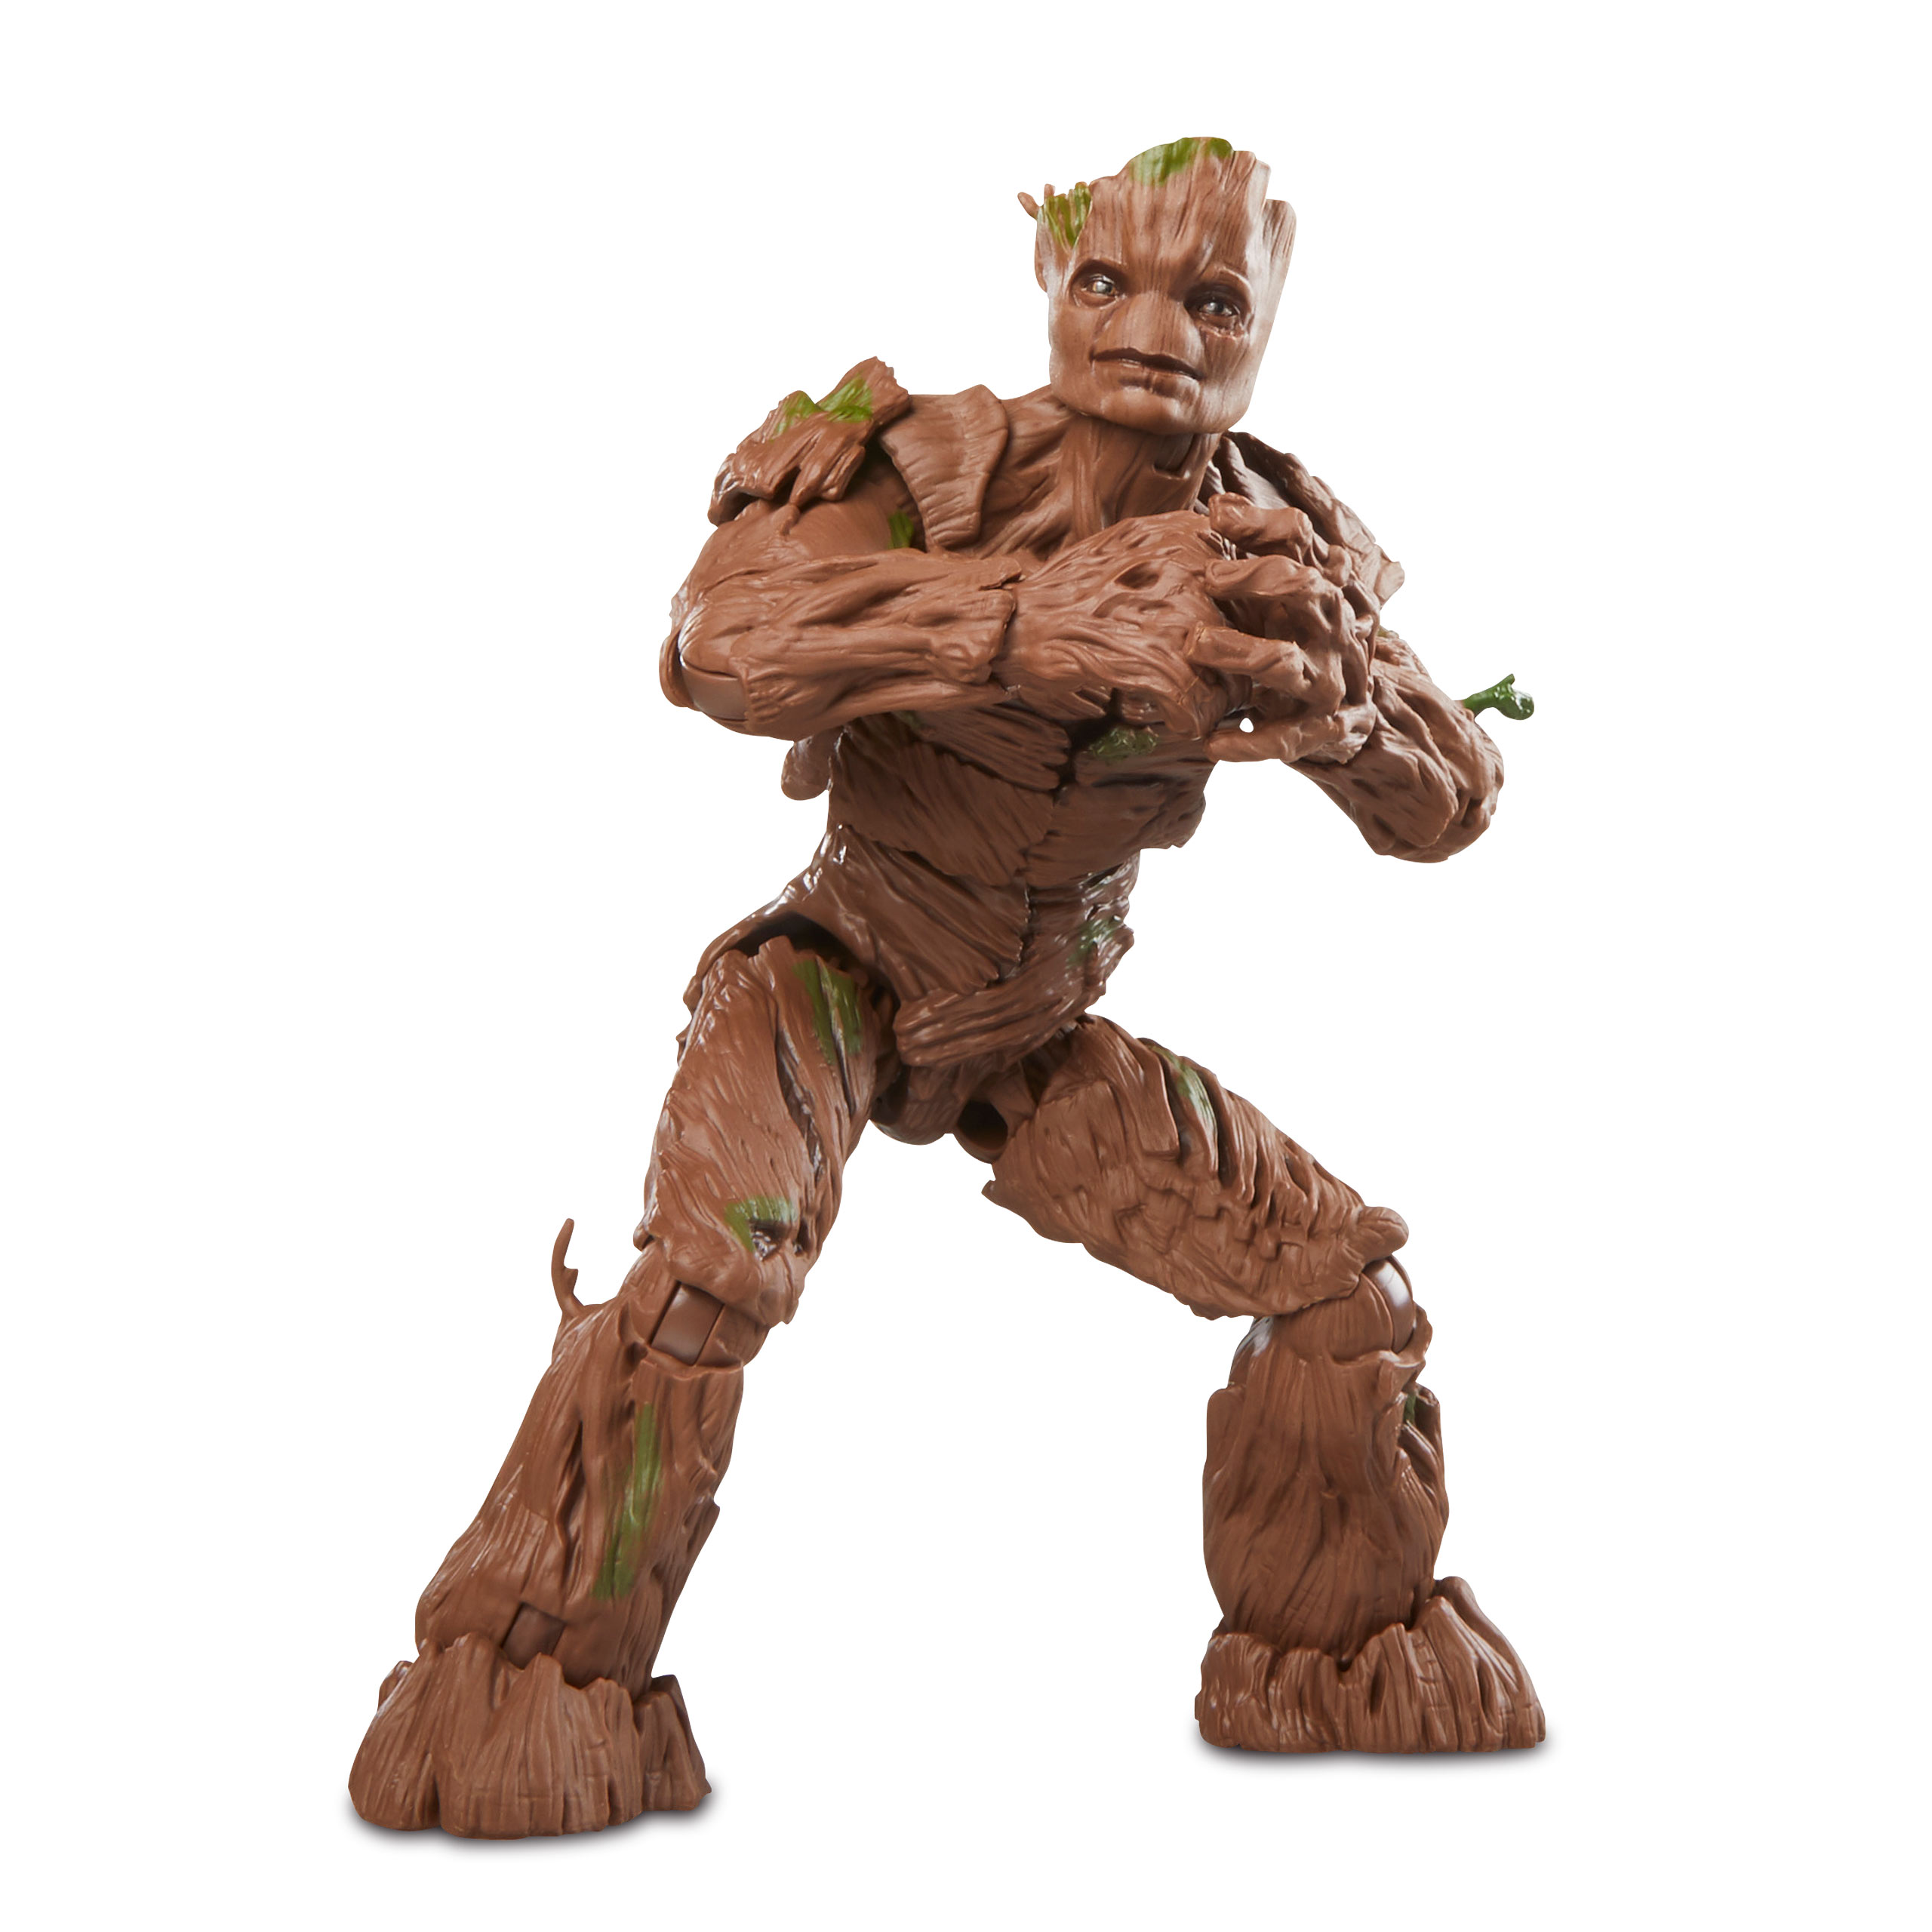 Guardians of the Galaxy - Groot Marvel Legends Series Action Figure